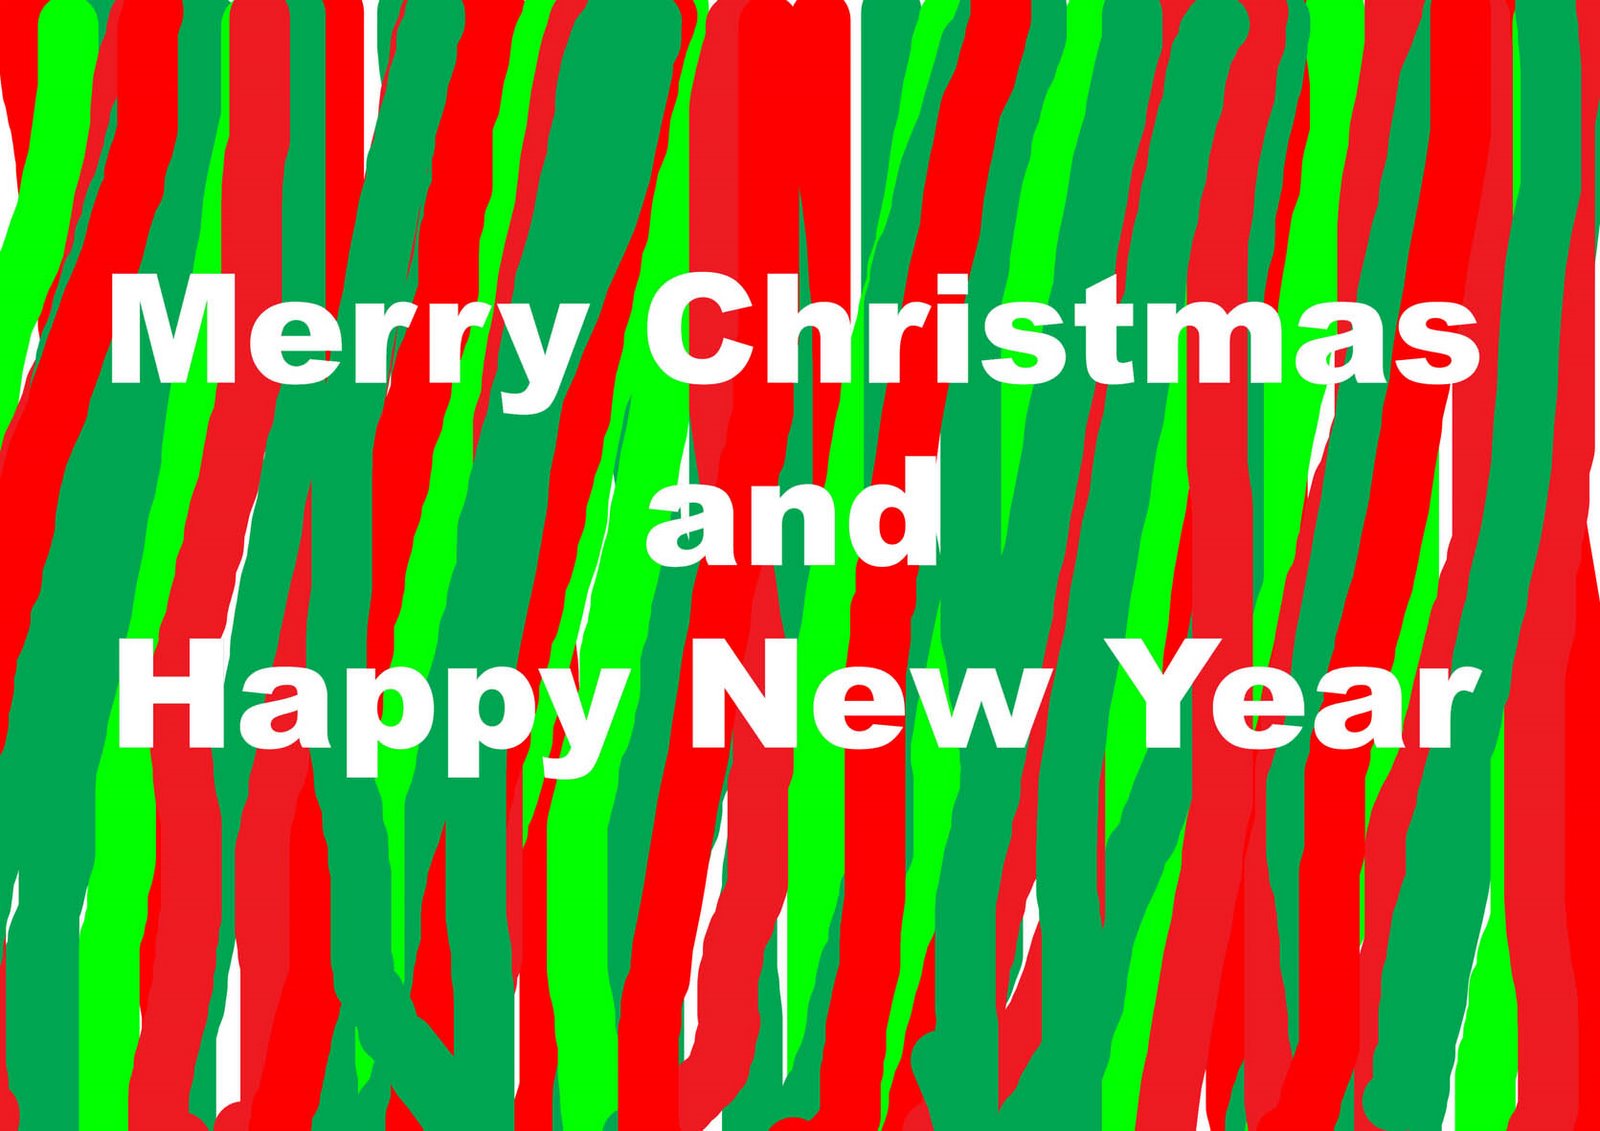 [merry+christmas+and+happy+new+year.jpg]